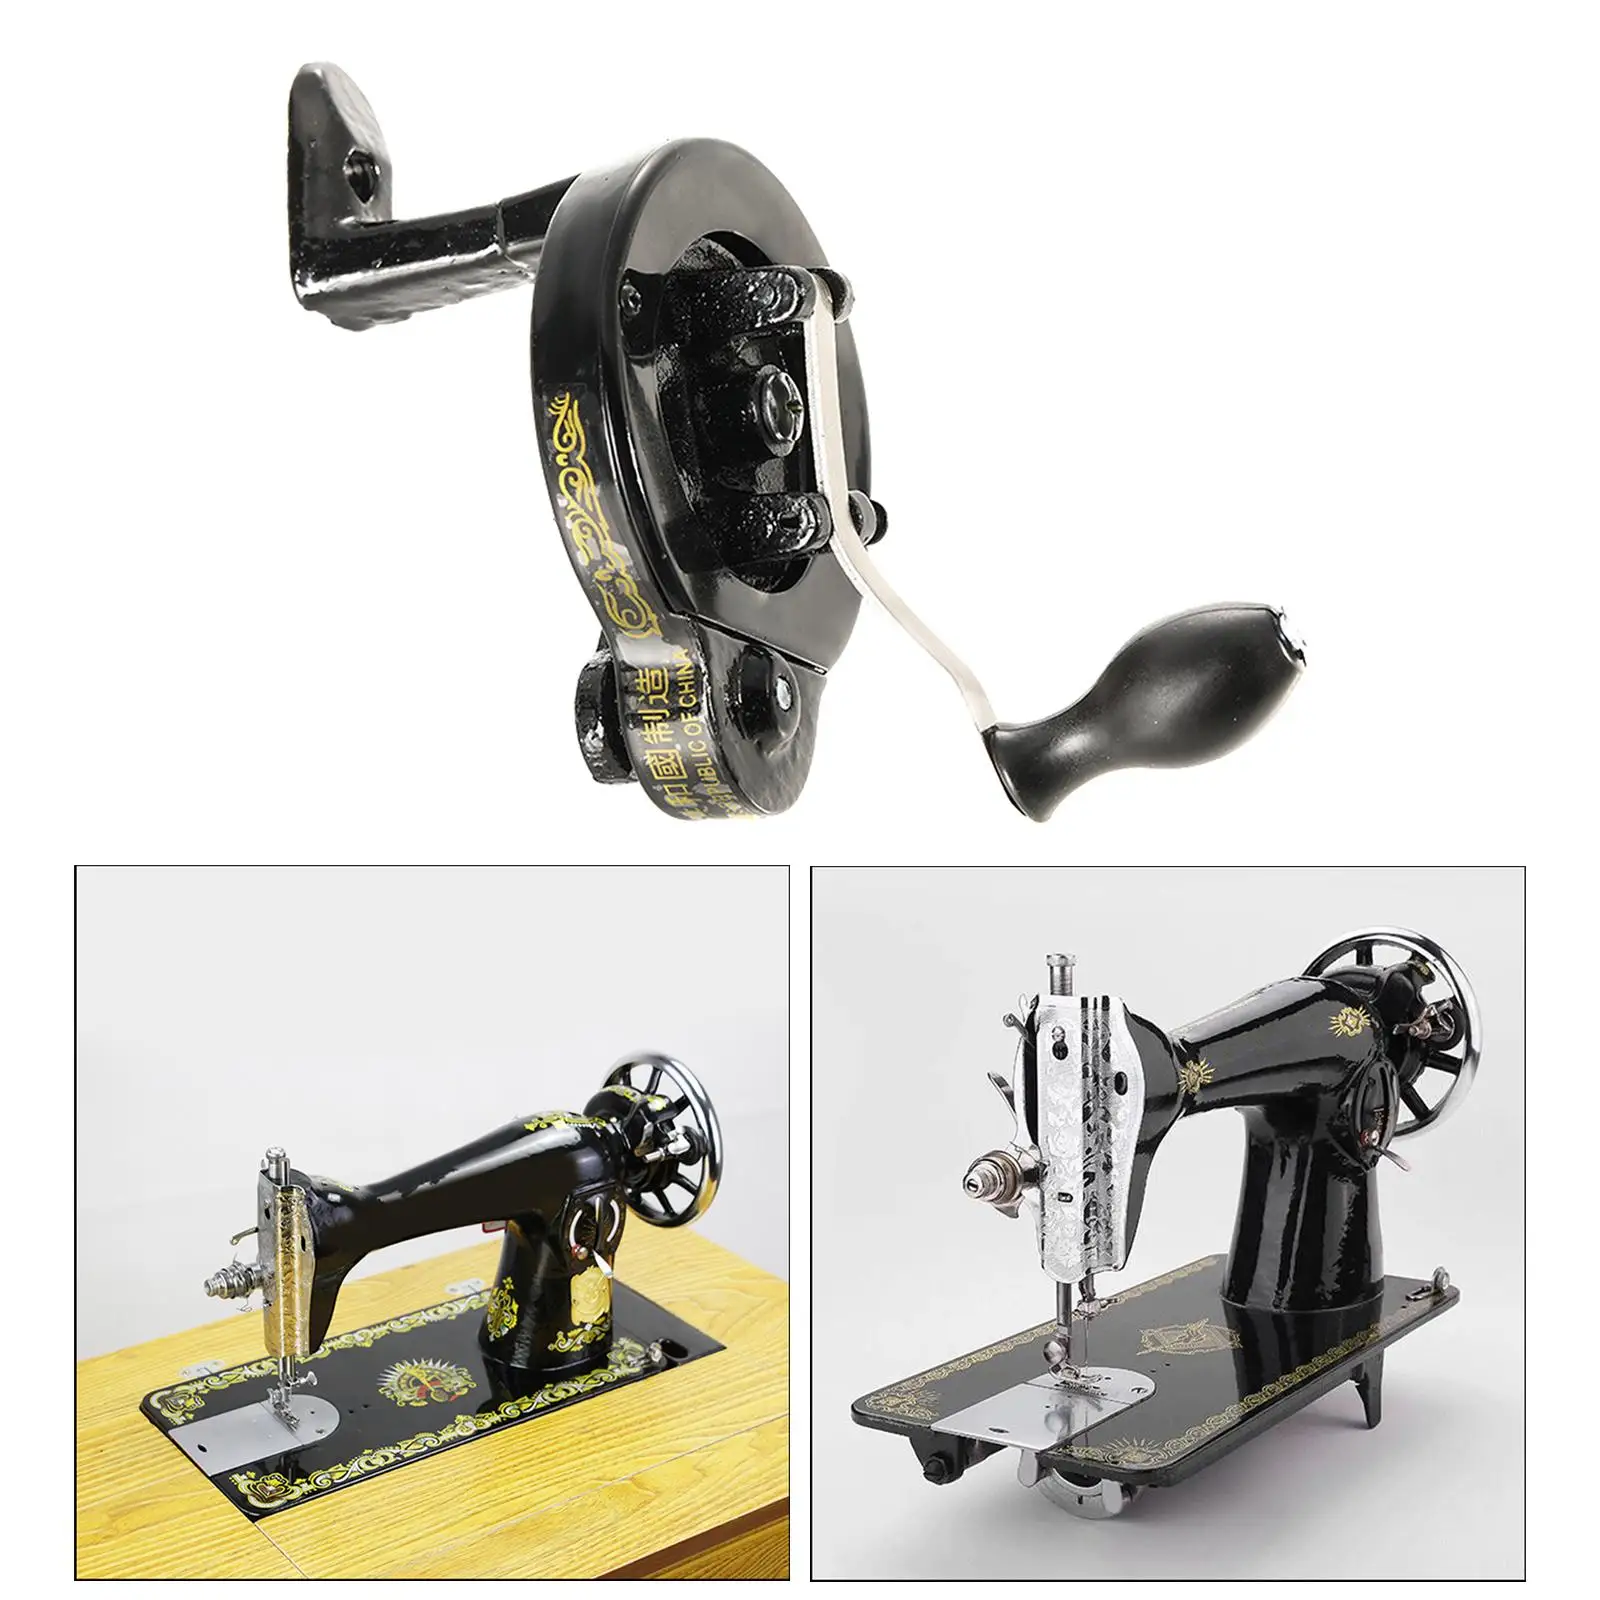 Metal Sewing Machine Hand Crank Handcrank Replacement Parts Sew Accessory Tool Supplies Handle for Vintage Sewing Machines